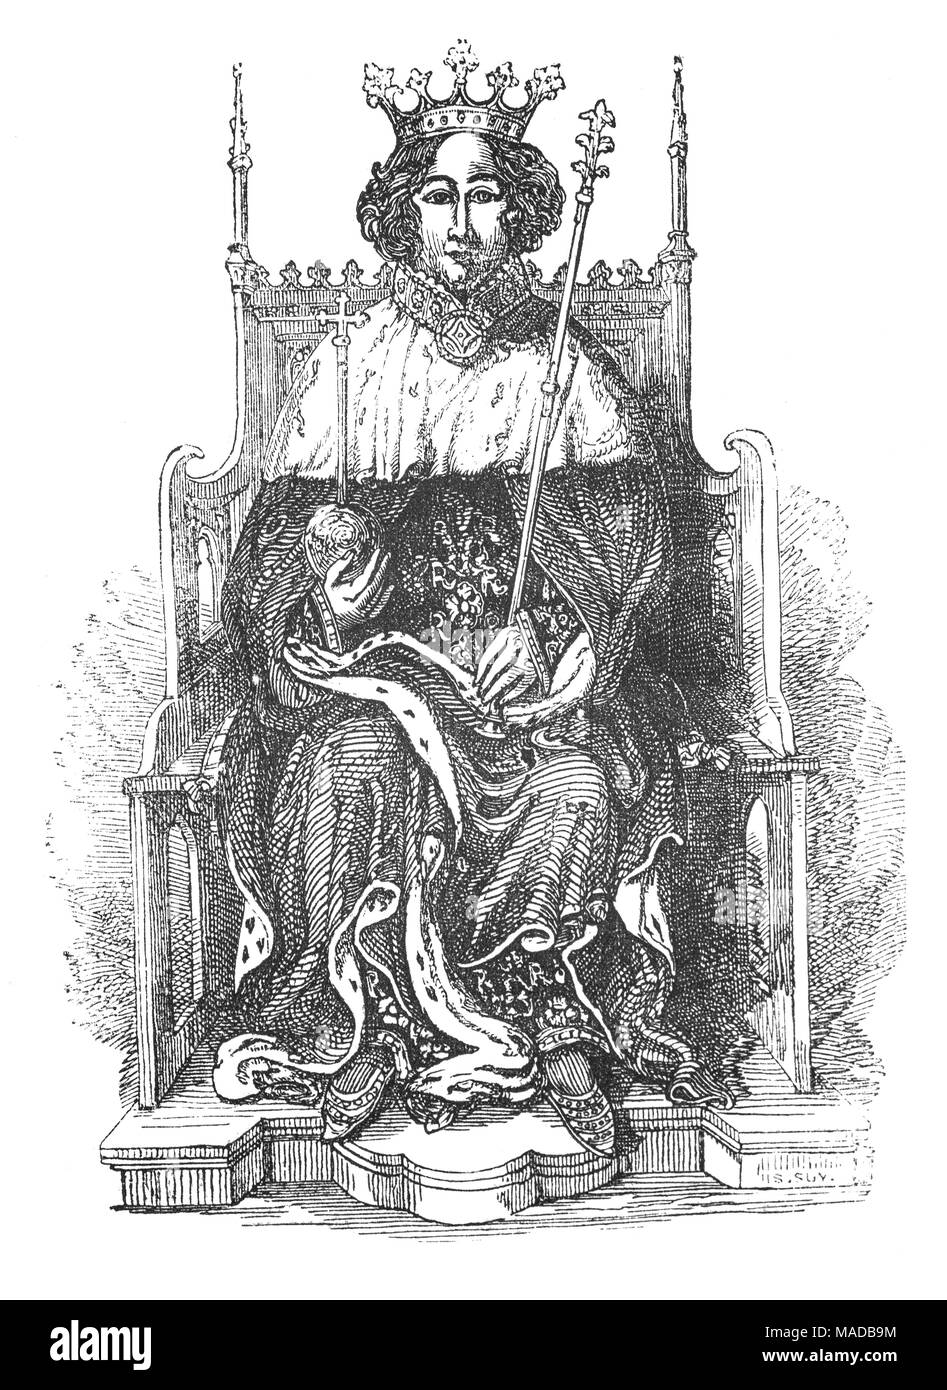 Richard II (1367 – 1400) aka Richard of Bordeaux, was King of England from 1377 until he was deposed on 30 September 1399. Richard, a son of Edward the Black Prince, was born in Bordeaux during the reign of his grandfather, Edward III. He was the younger brother of Edward of Angoulême, upon whose death Richard, at three years of age, became second in line to the throne after his father. Upon the death of Richard's father prior to the death of Edward III, Richard became the heir apparent to the throne. With Edward III's death the following year, Richard succeeded to the throne aged ten. Stock Photo